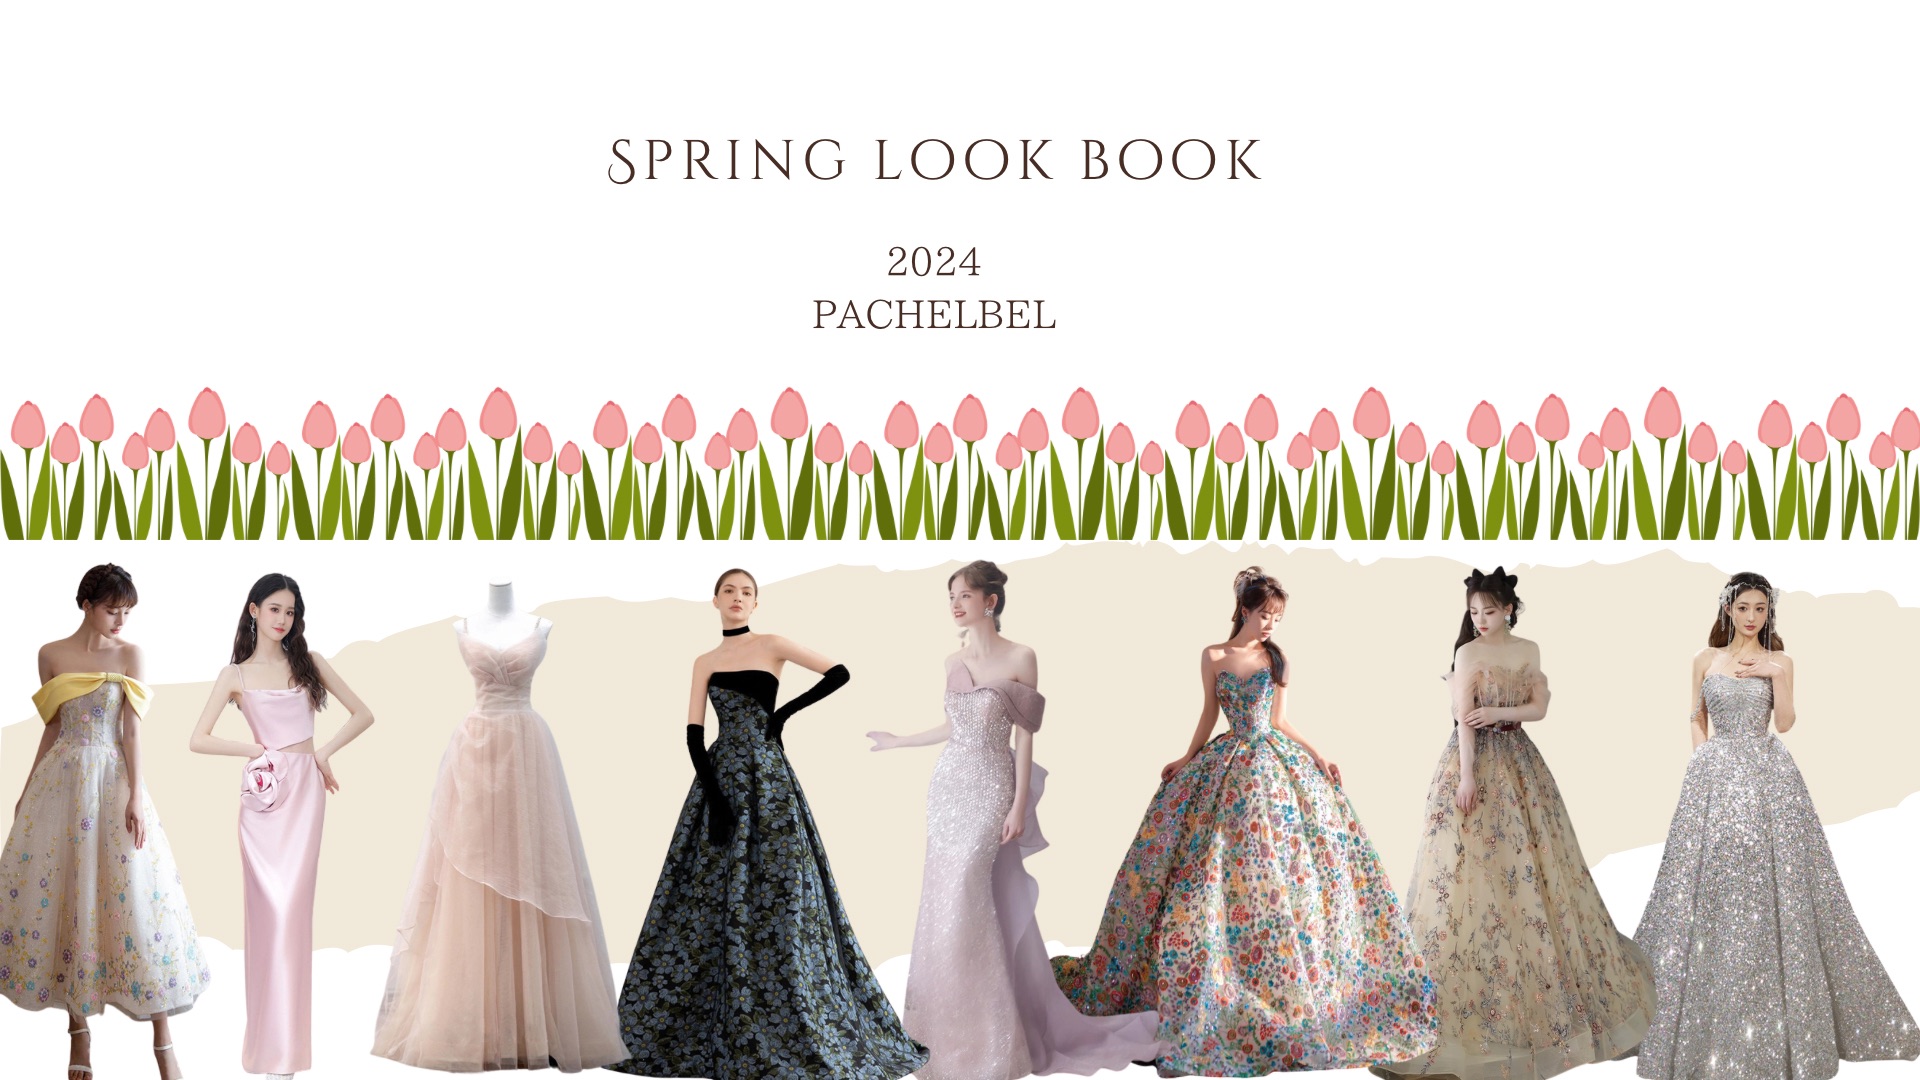 2024's Spring LOOK BOOK